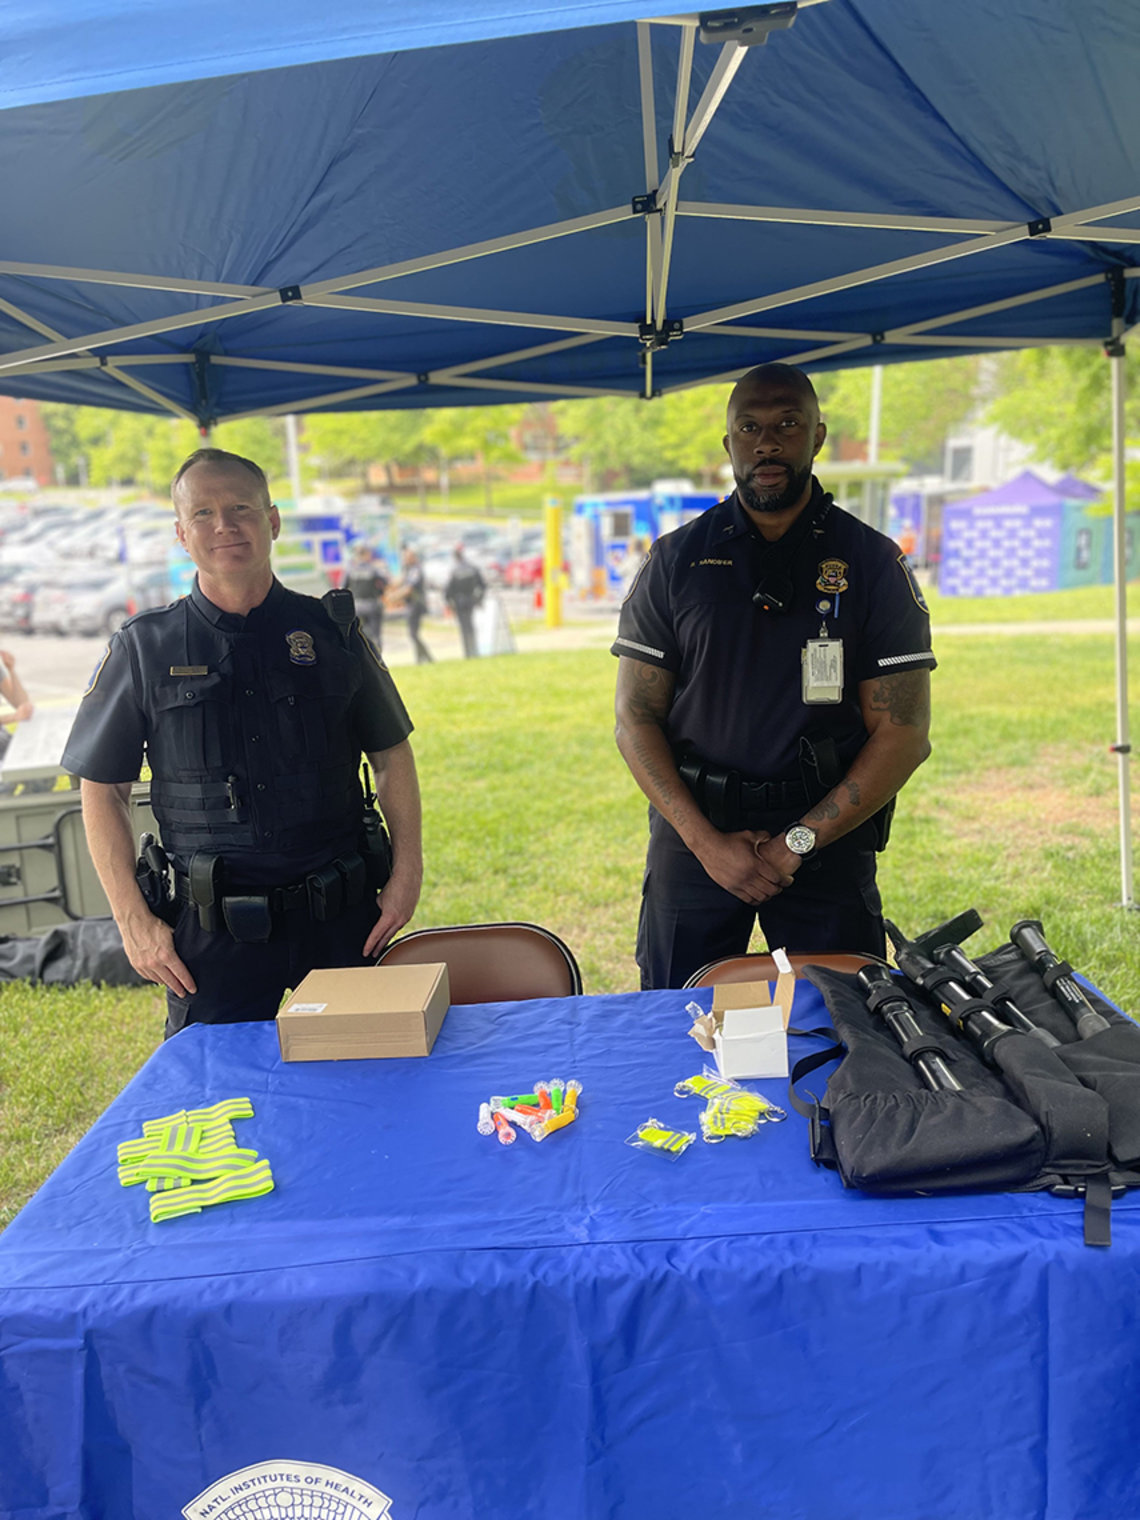 Two uniformed police officers stand at information table under blue tent.